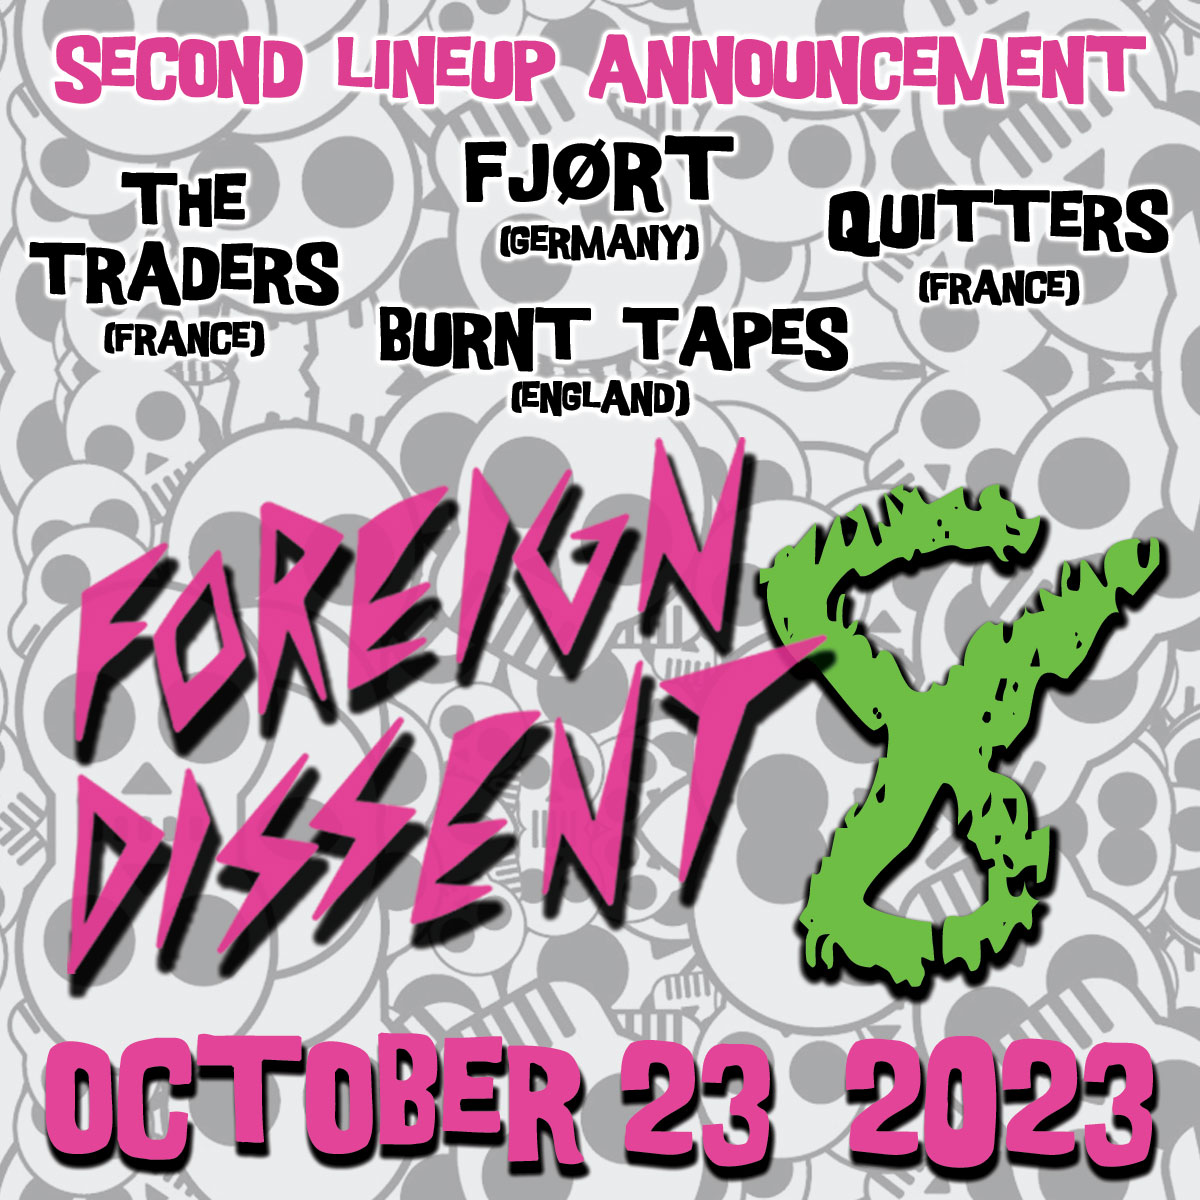 Second lineup announcement for Foreign Dissent 8 features The Traders from France, Fjørt from Germany, Burnt Tapes from England, and Quitters from France. The event is October 23, 2023.